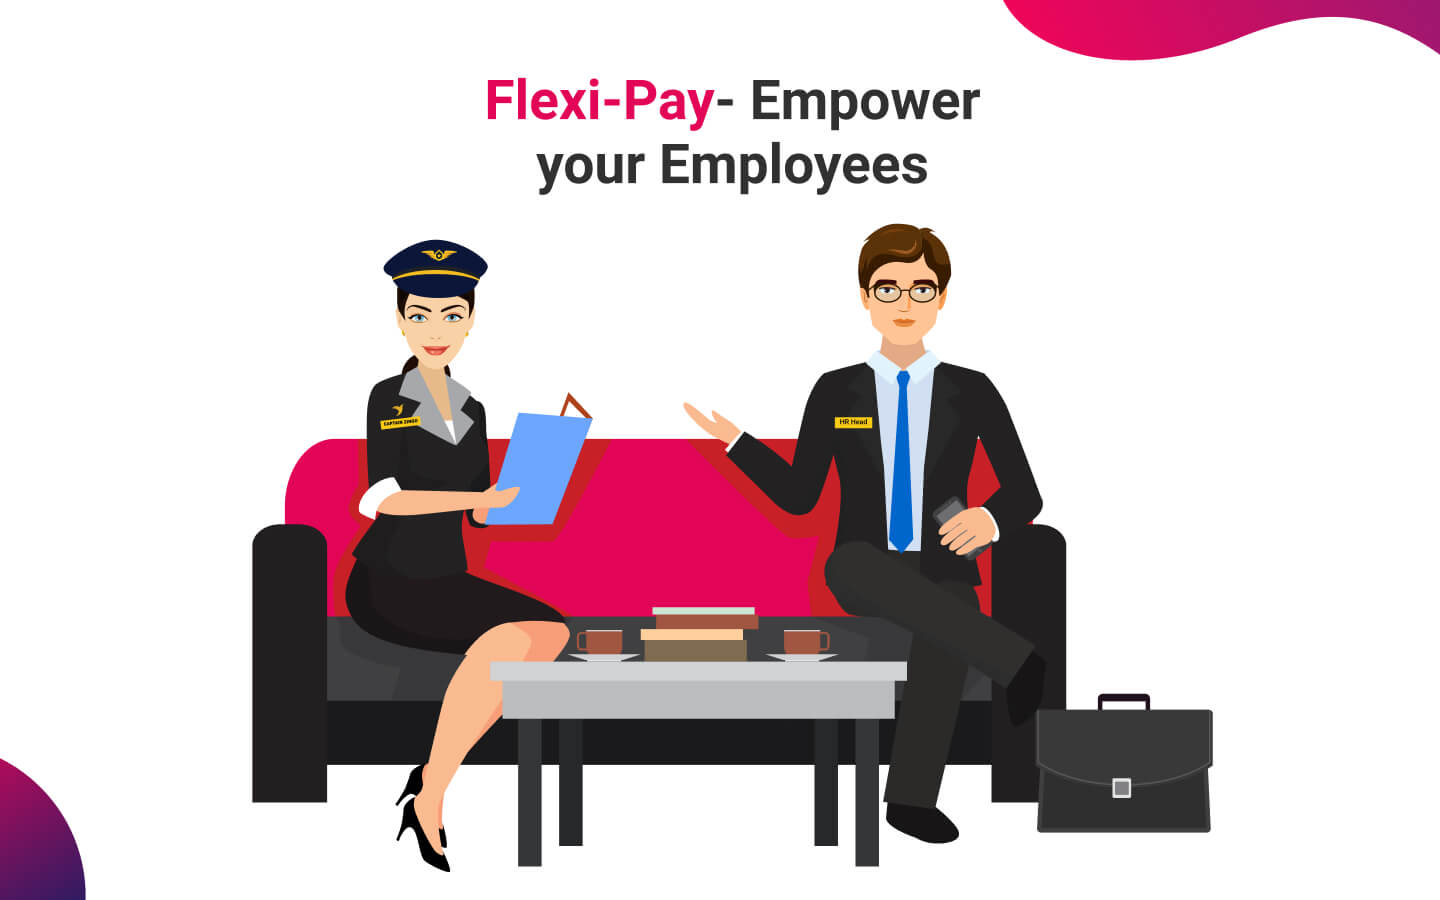 Flexi-Pay- Empower your Employees